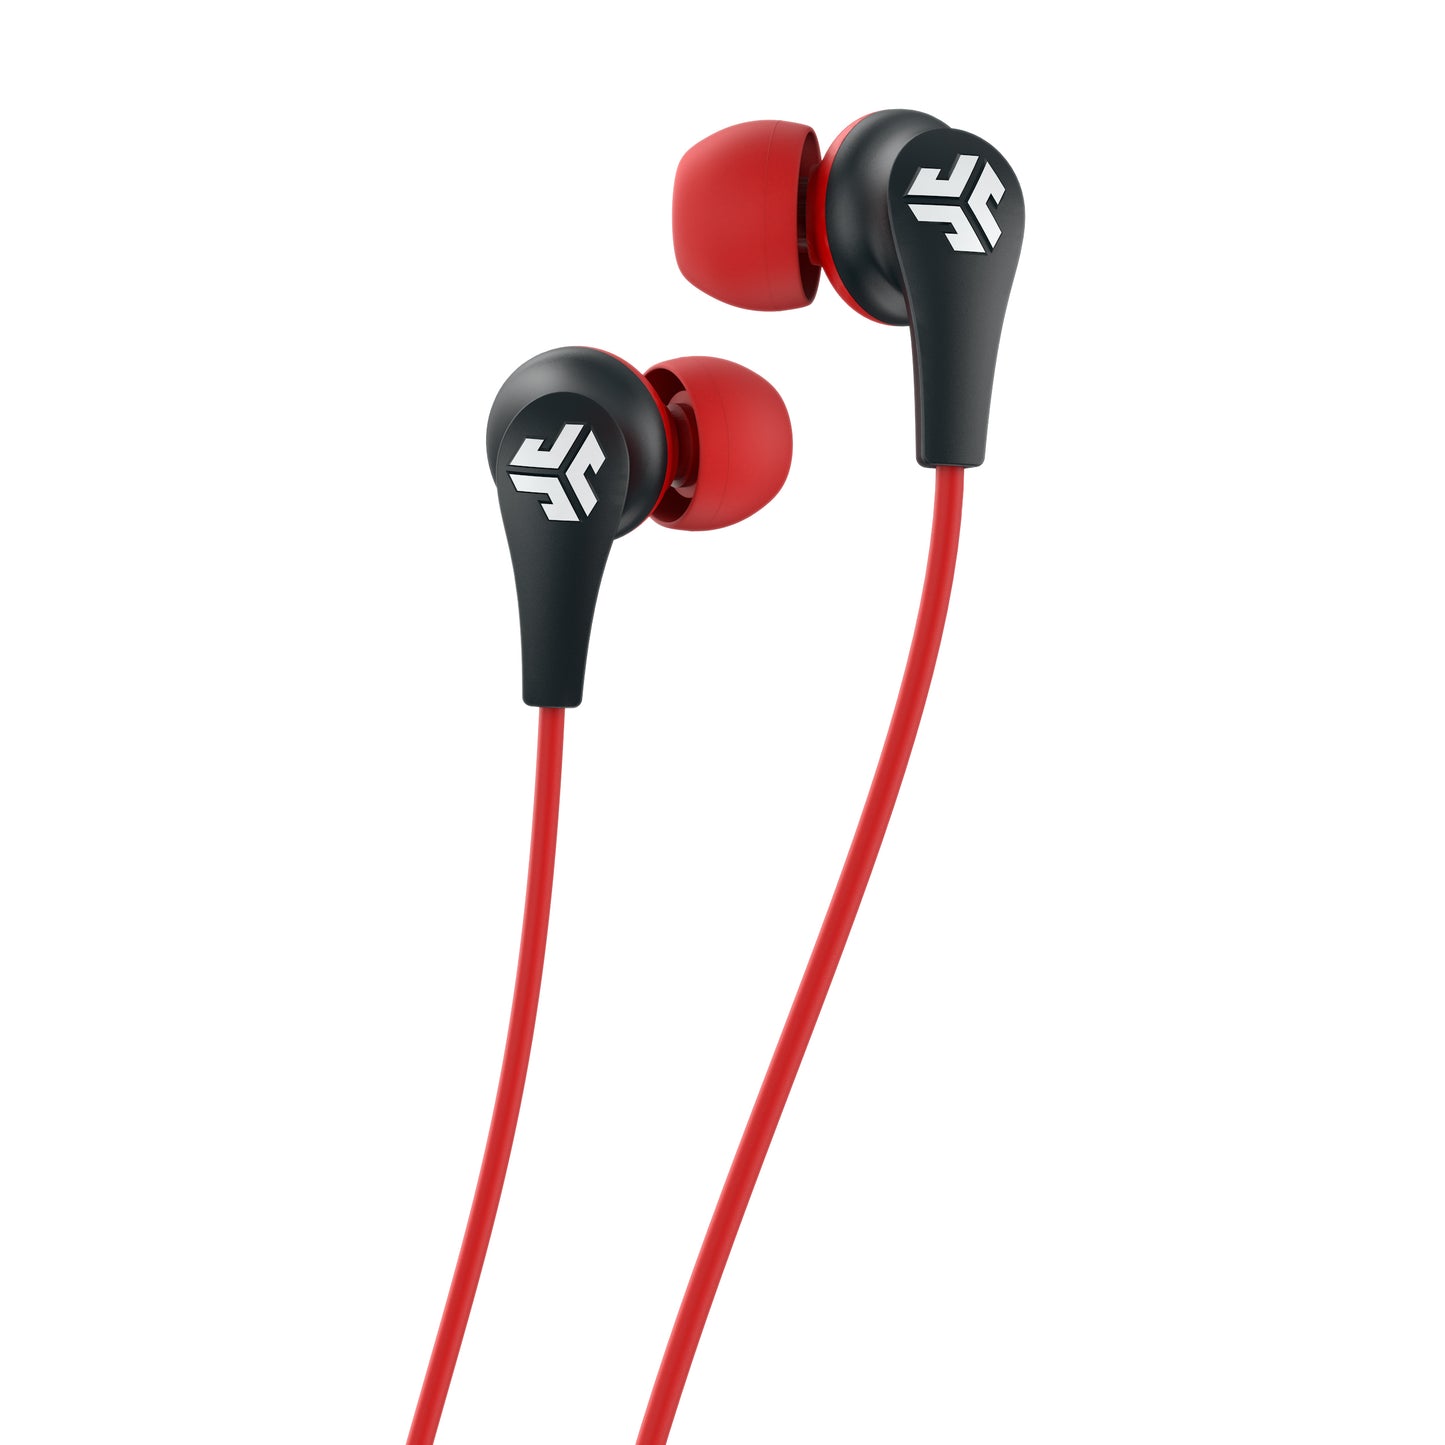 JBuds Pro Wireless Signature Earbuds Black / White / Red